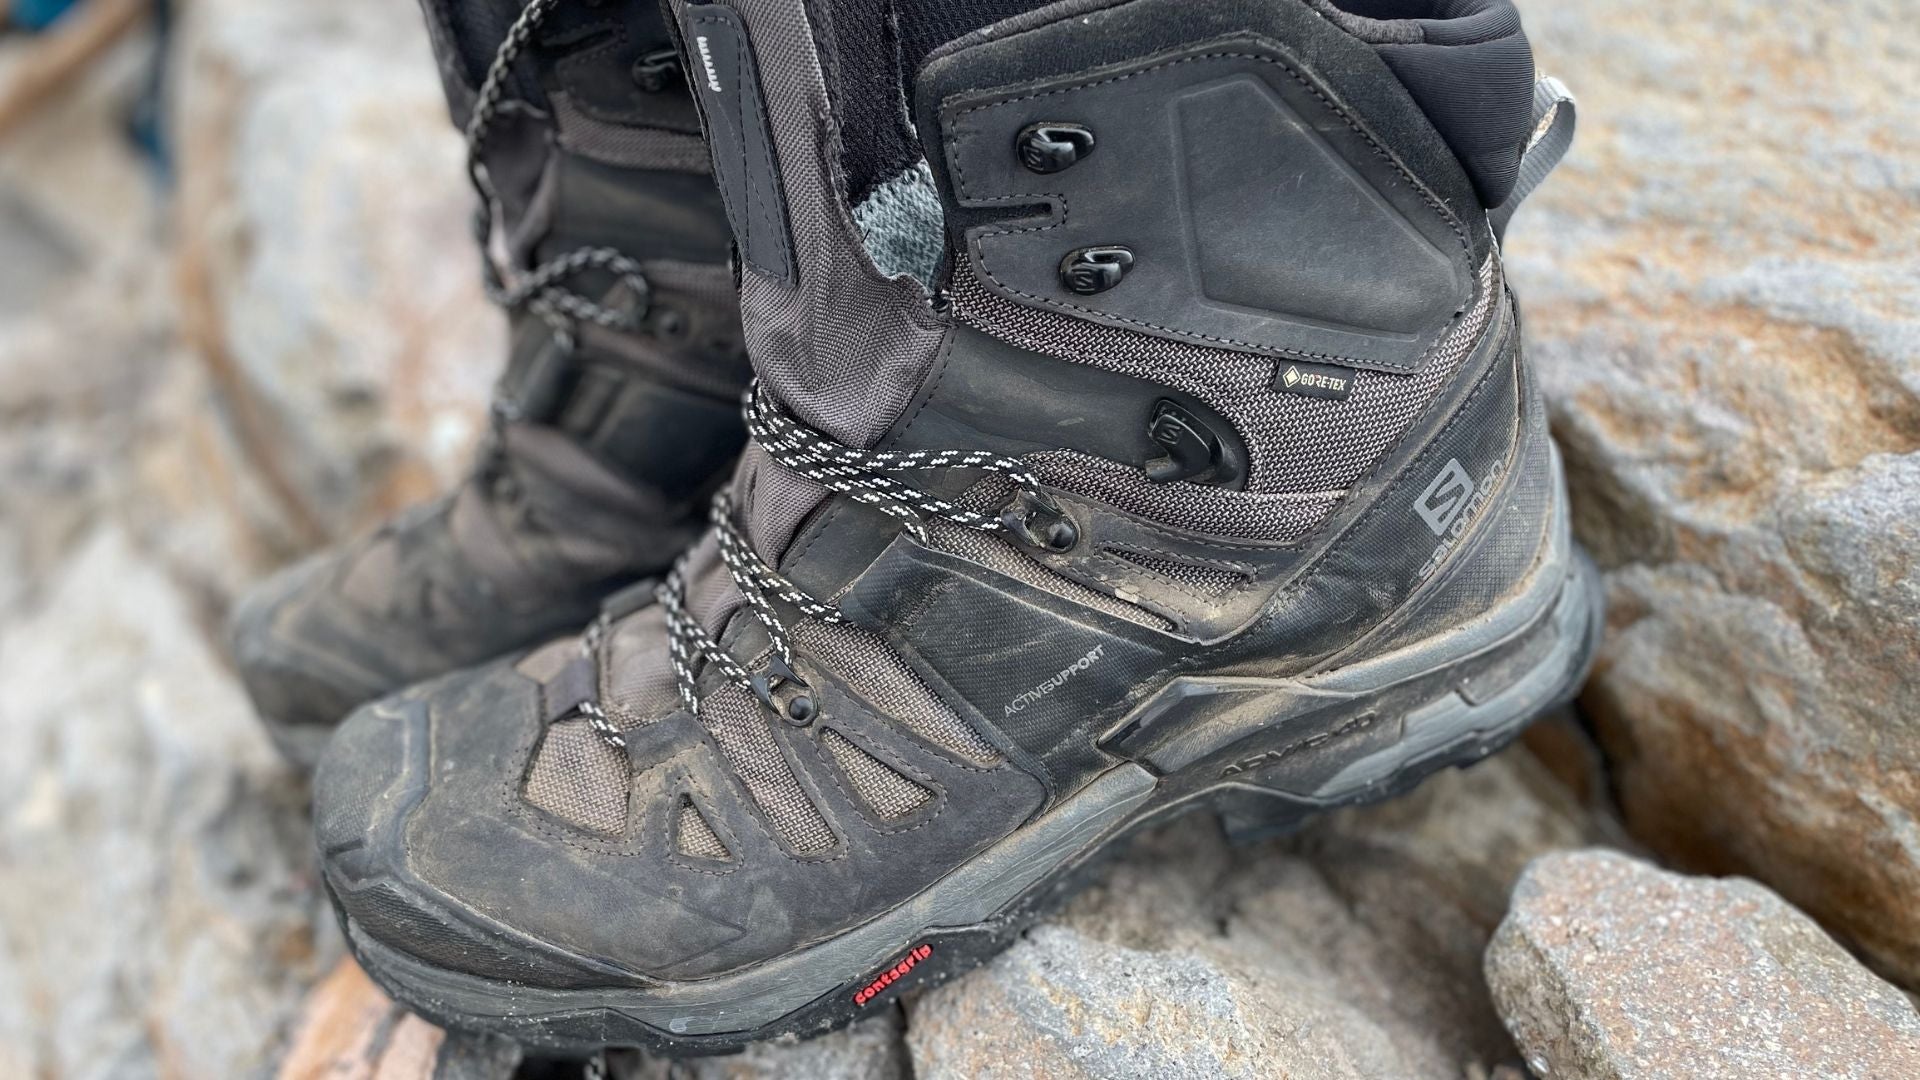 contact overthrow Uncle or Mister Salomon Quest 4D 3 Gore-Tex Boots (Review) 2021 - Task & Purpose